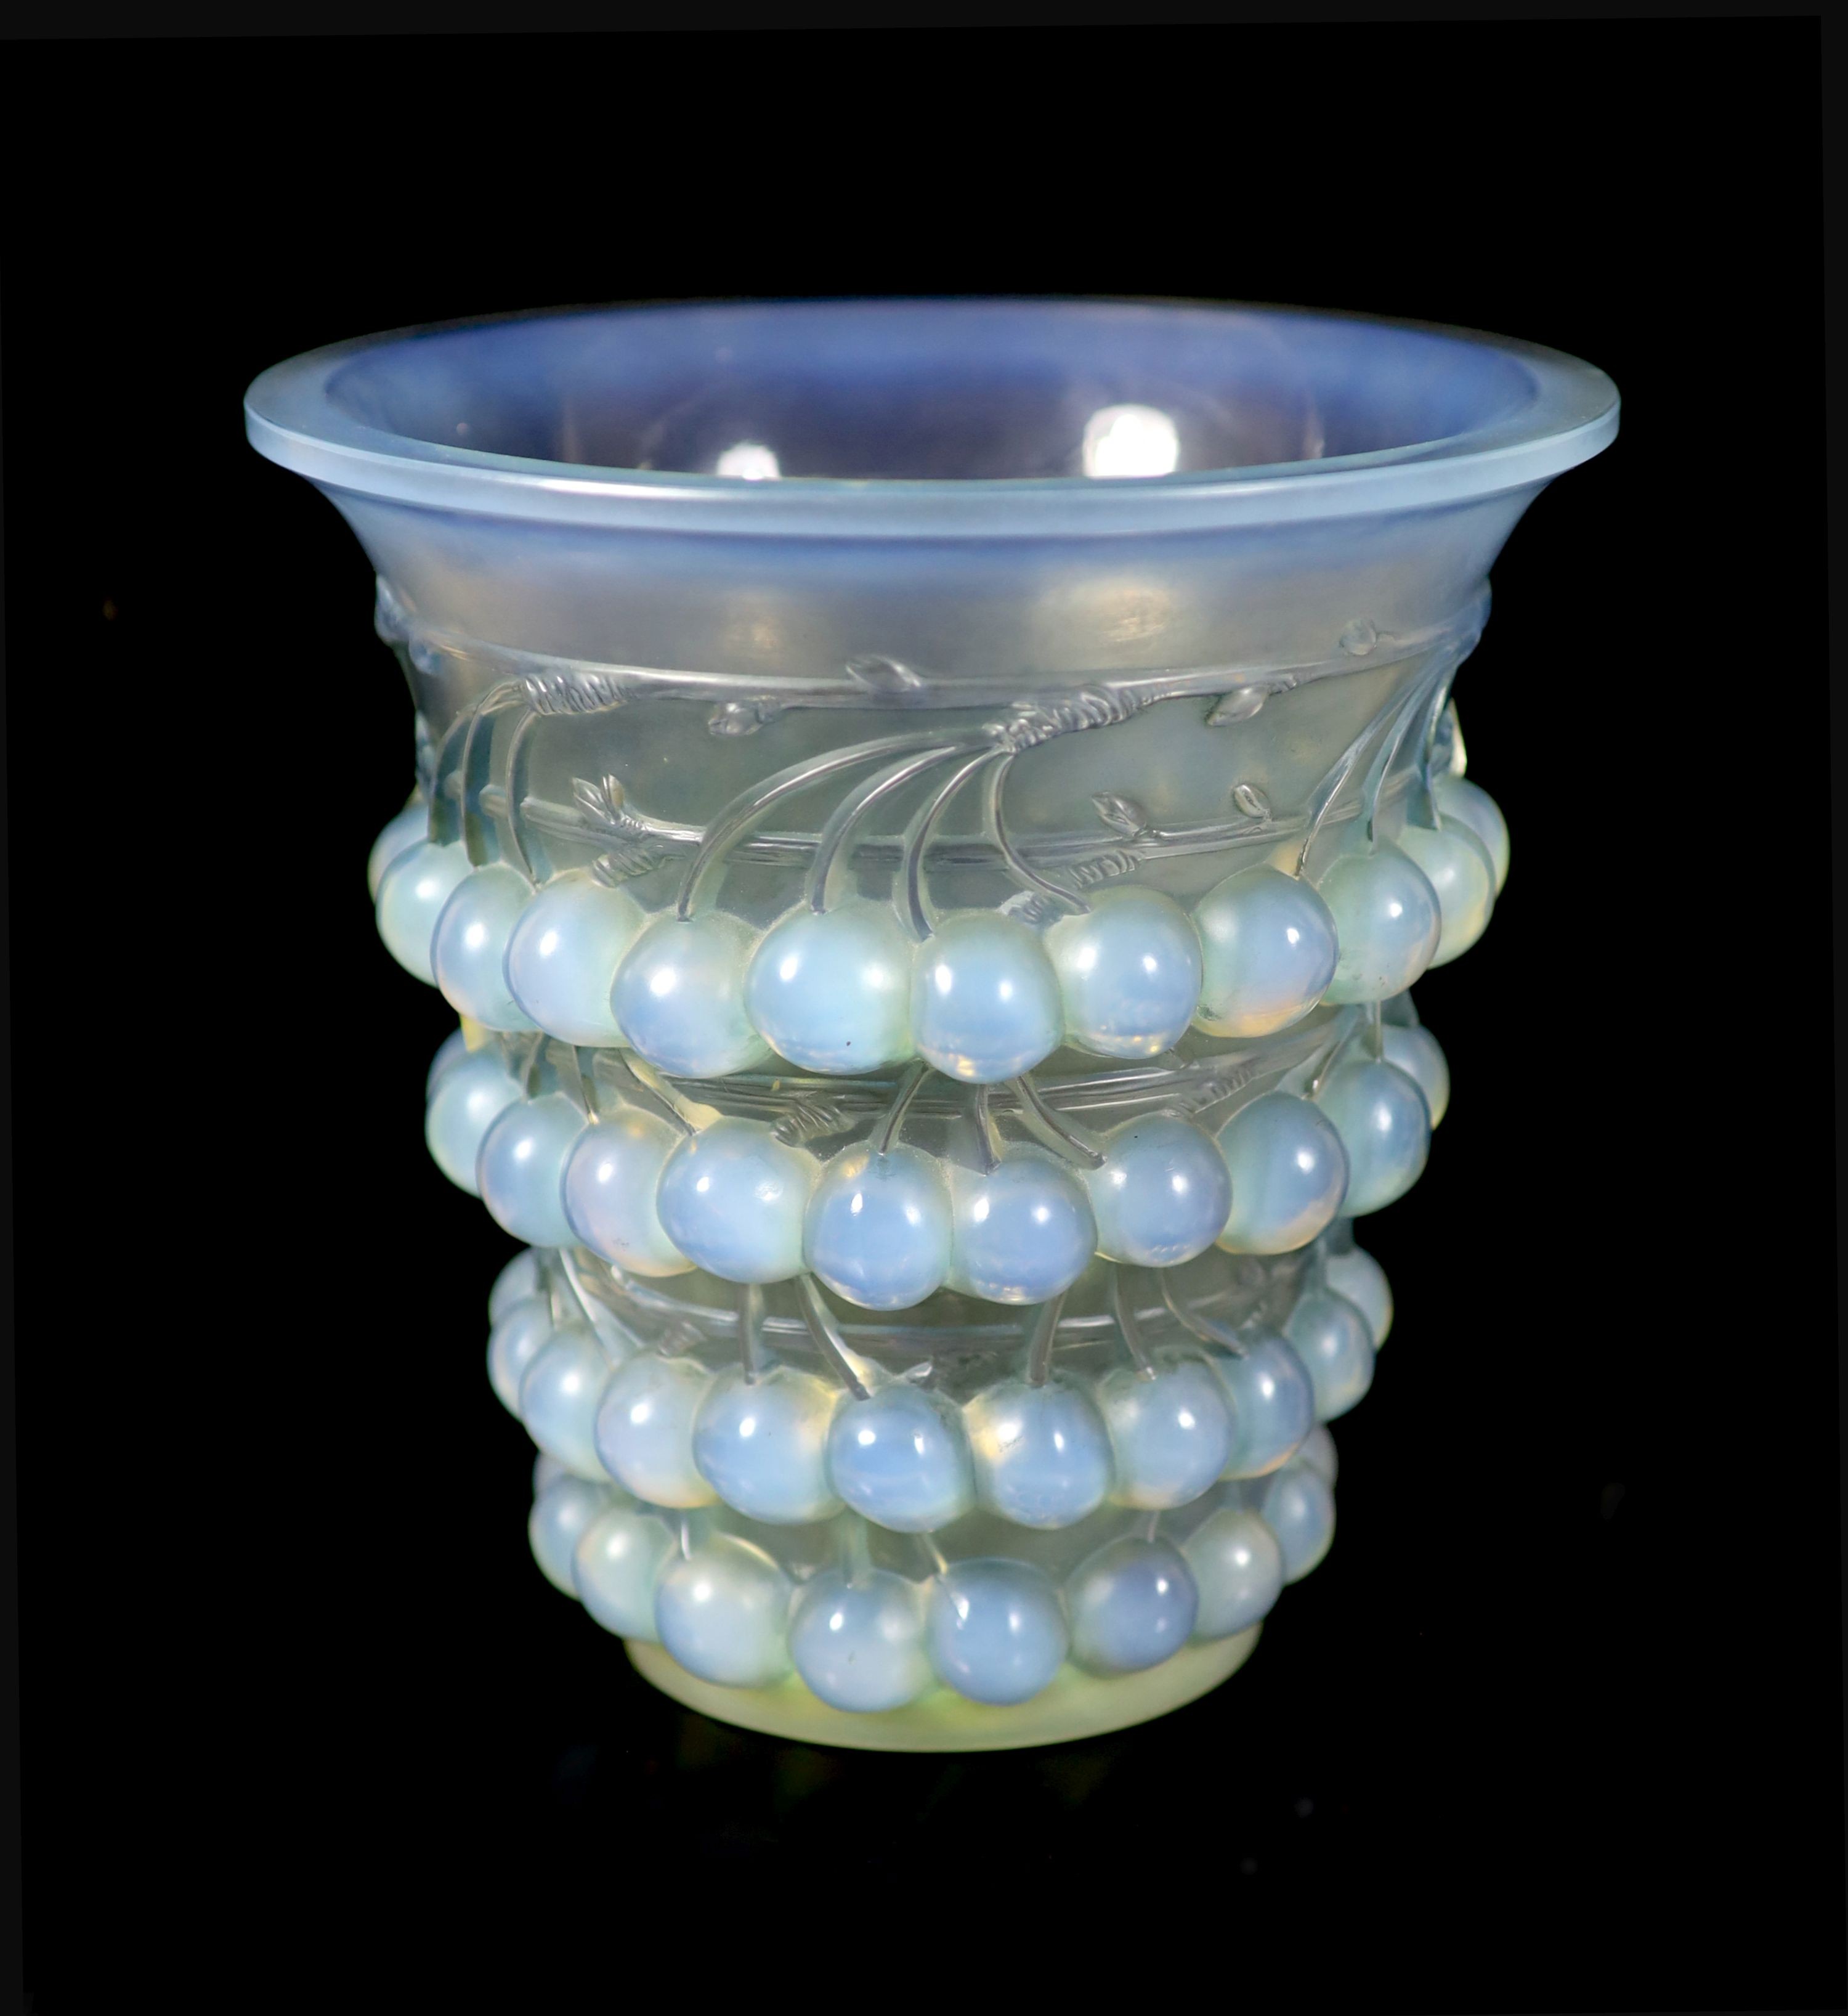 A Lalique Montmorency opalescent glass vase, Marcilhac 1050, model introduced 1930, 20.3 cm high